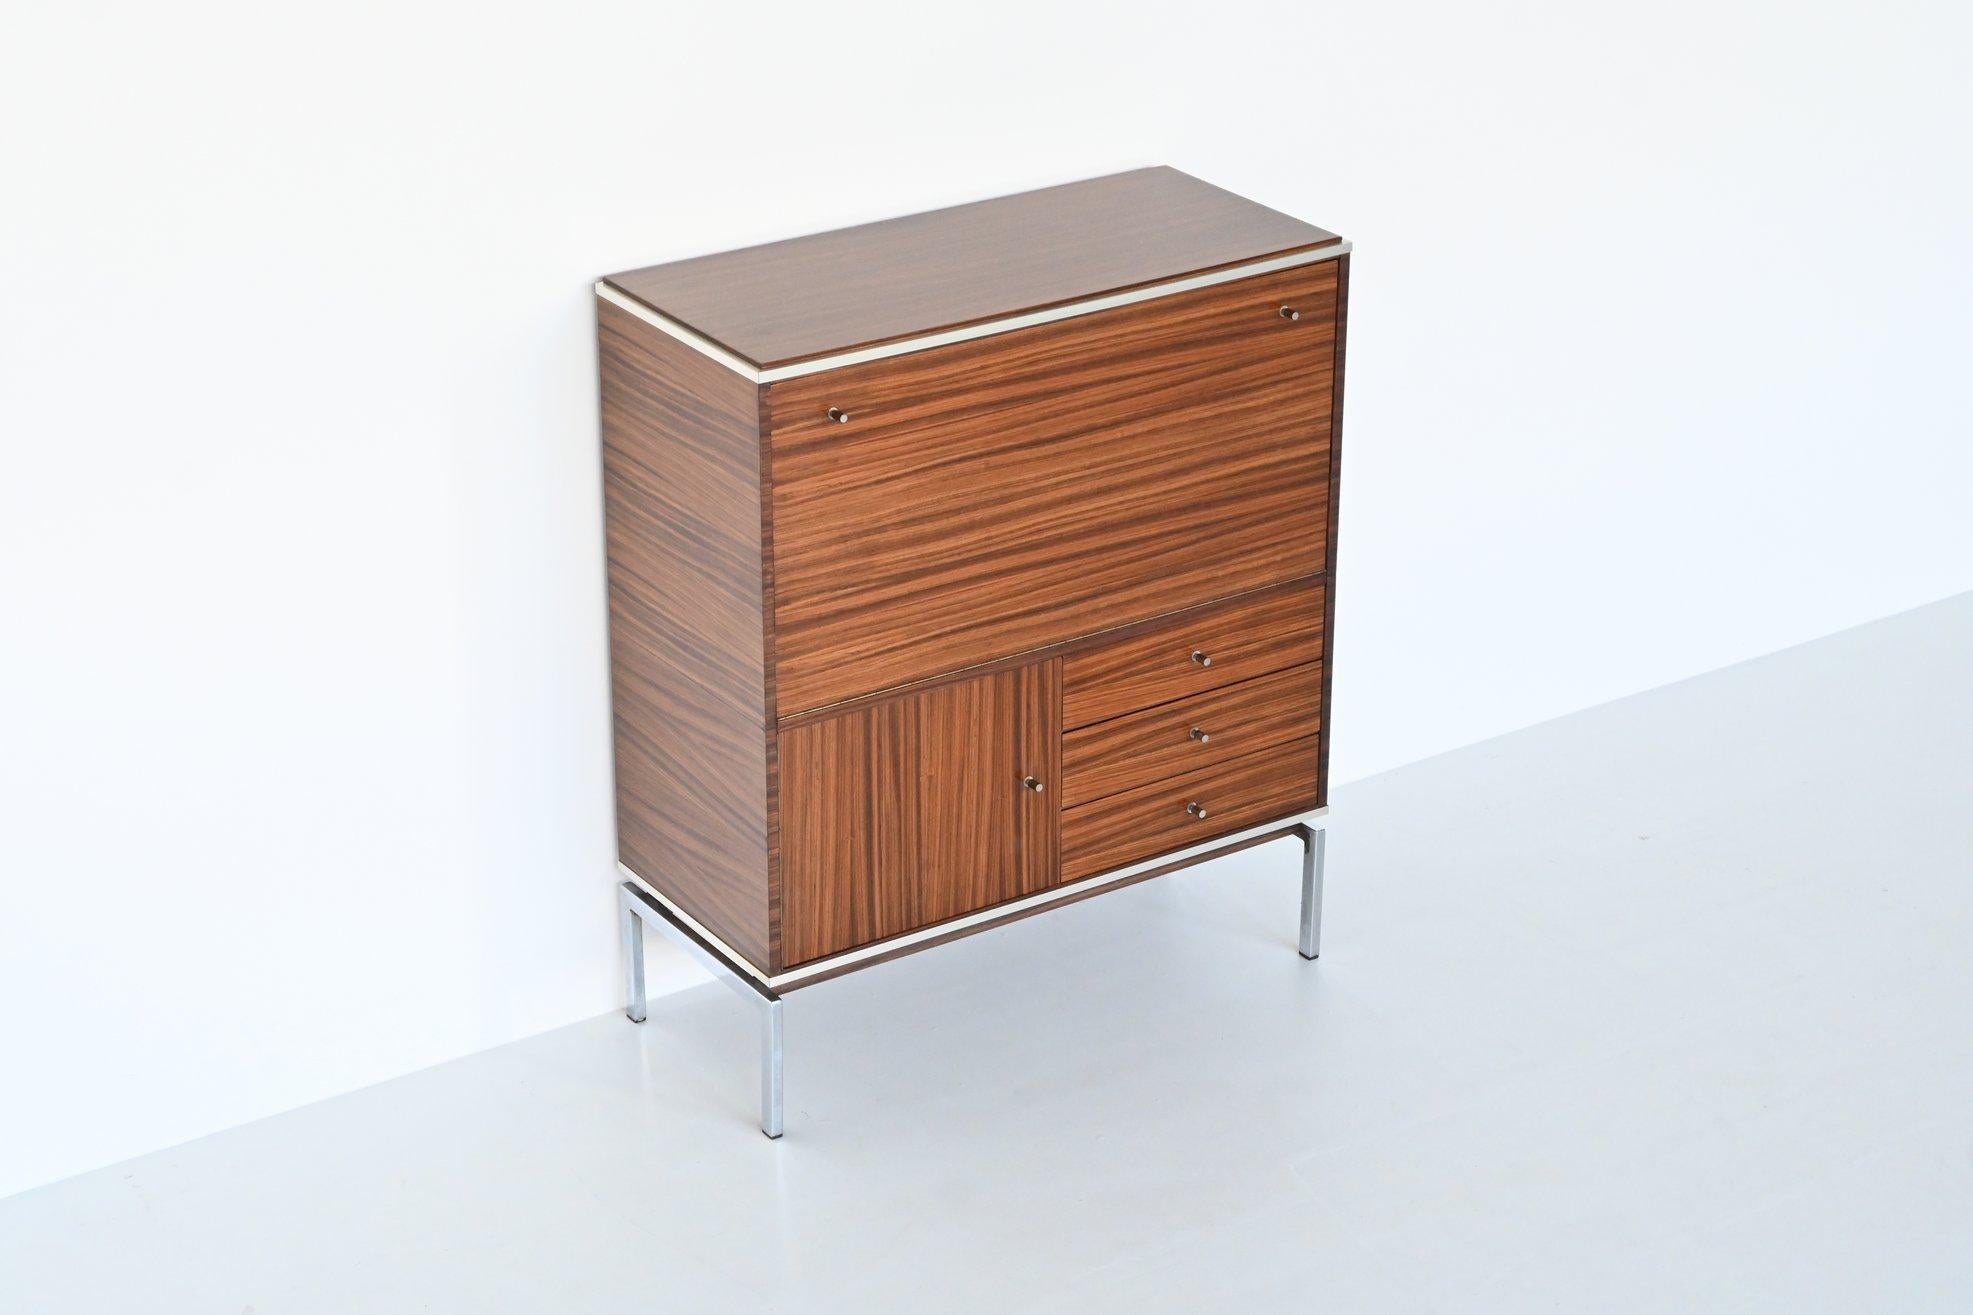 Beautiful buffet or bar cabinet designed by Pieter de Bruyne for AL Meubel, Belgium 1960.  This very nice slim shaped cabinet is made of dark grained rosewood supported by chromed steel legs. Even the inside door panels are beautiful flamed. The